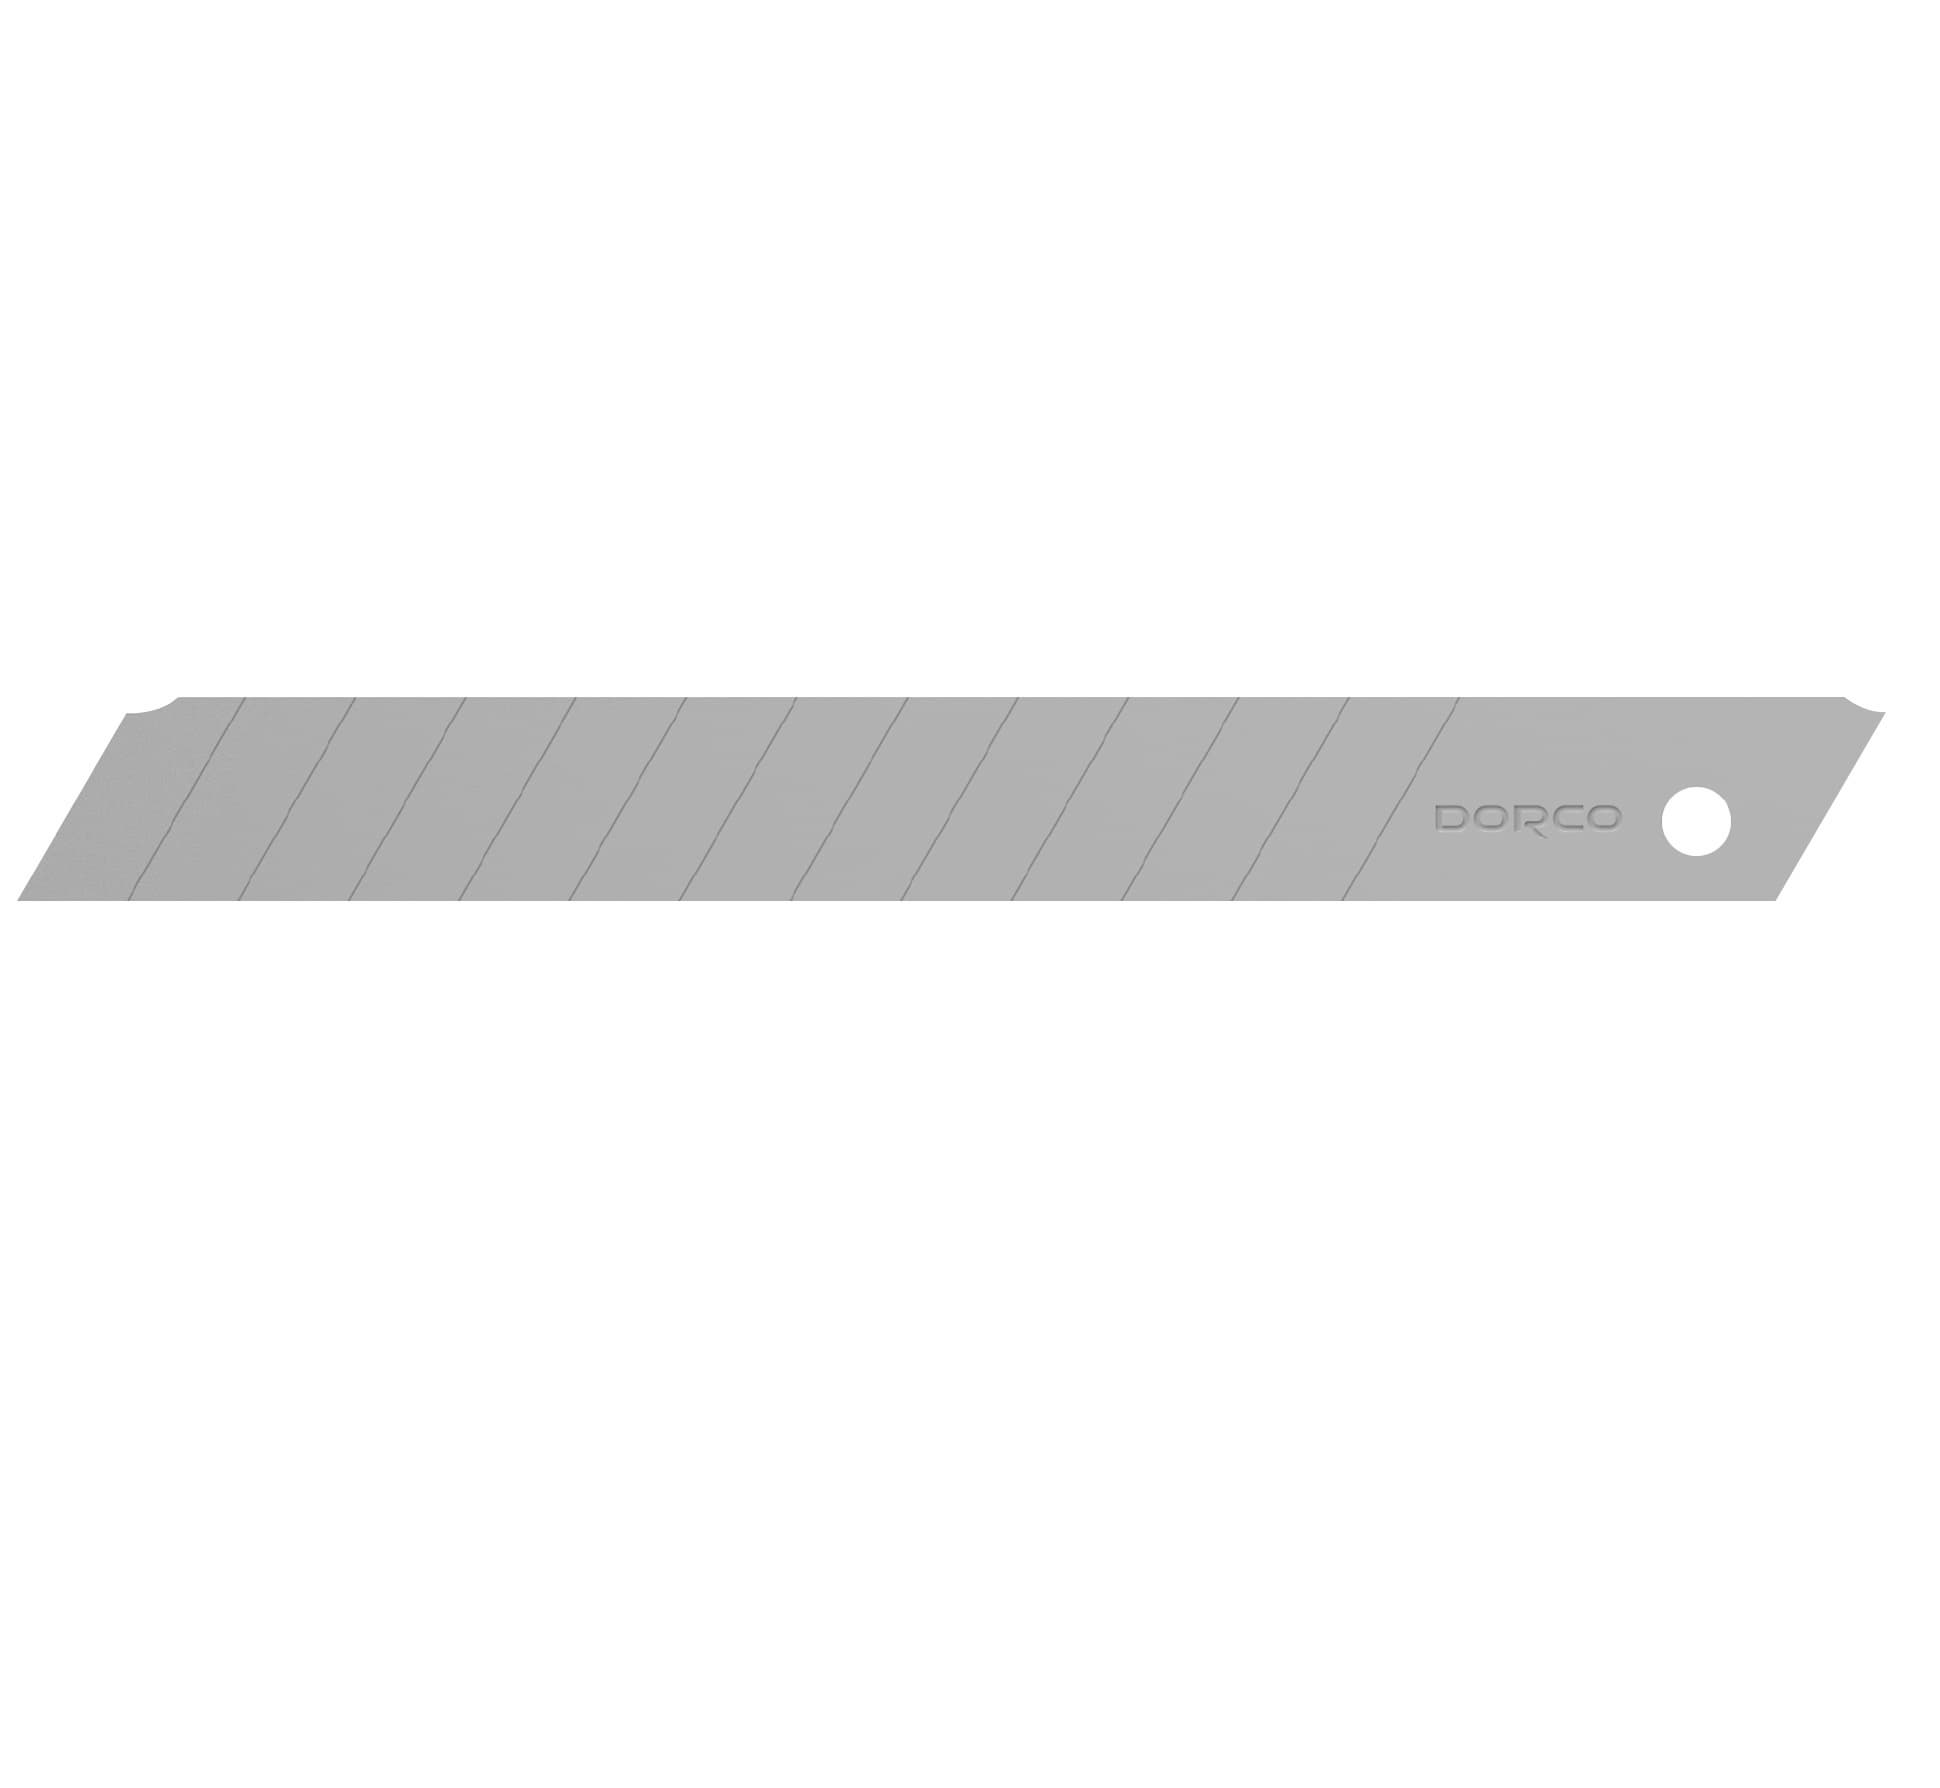 DORCO Snap_off Cutter Blade _ Small